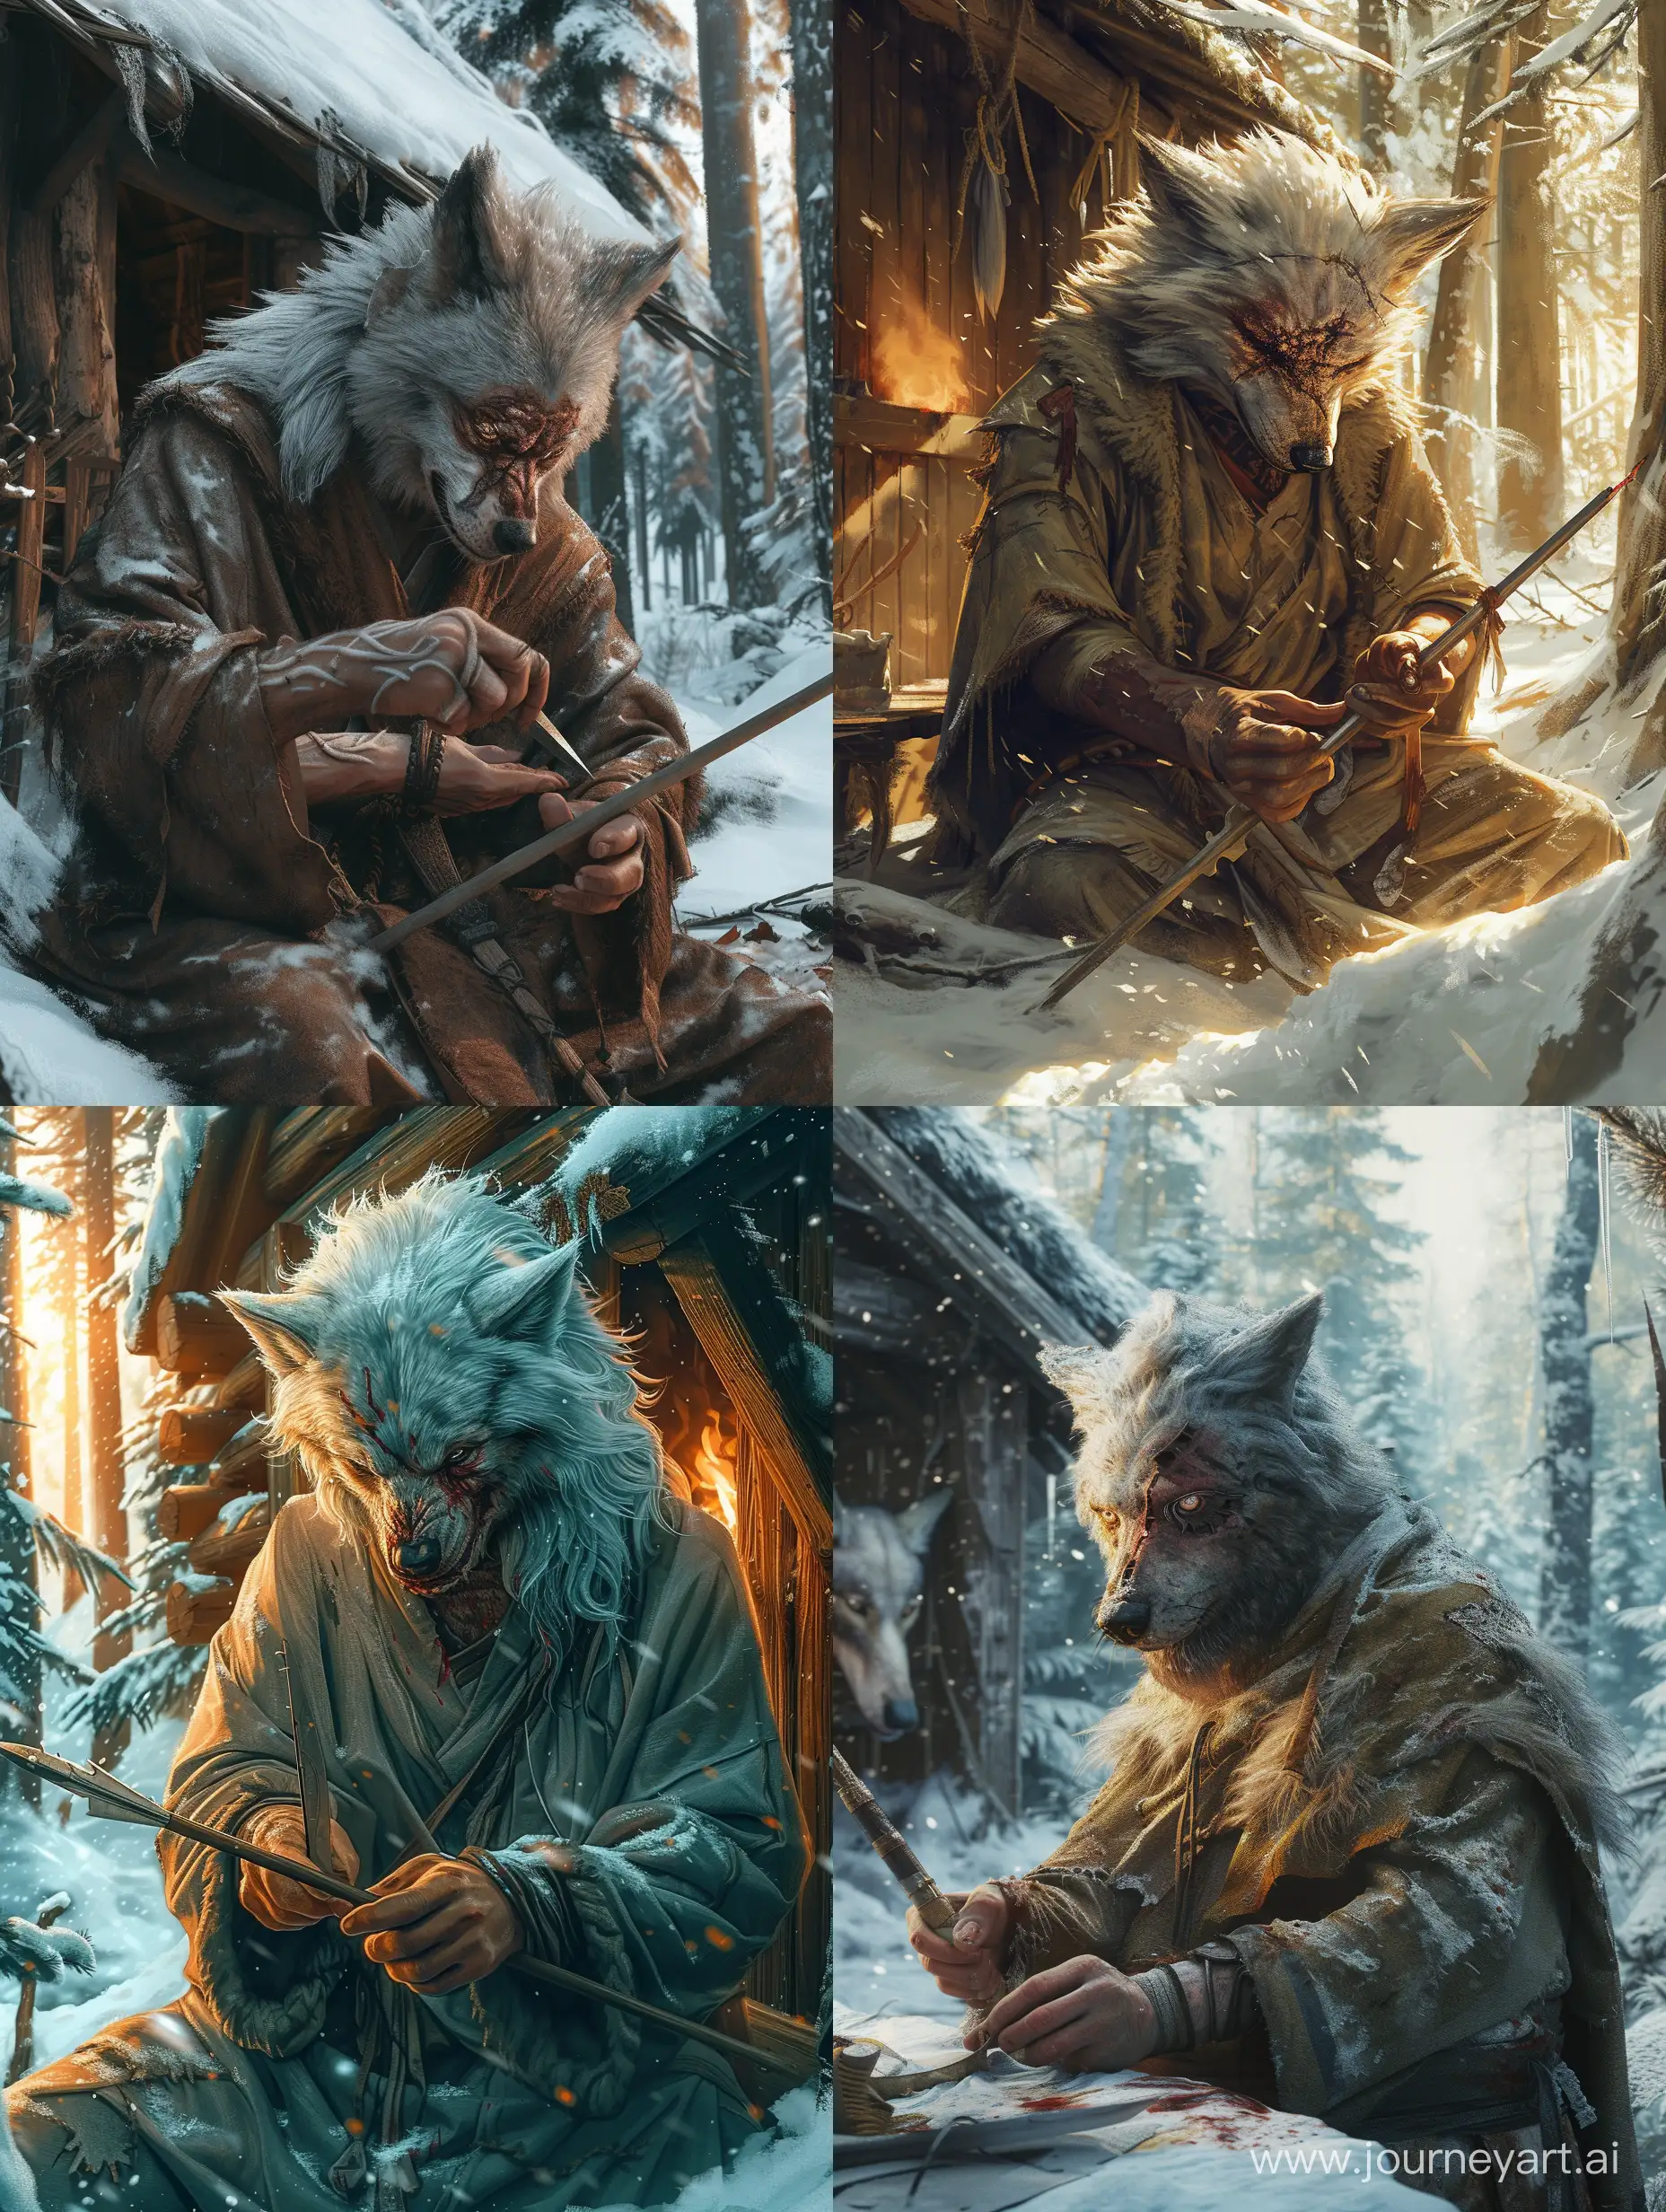 A warrior with wolf's head and human body,The leader of the white wolves,A big old wound on face,wearing a robe,in snowy forest,Next to the wooden hut,He is making a spear with a knife,Detailed clothing.incredible detail,warm light.